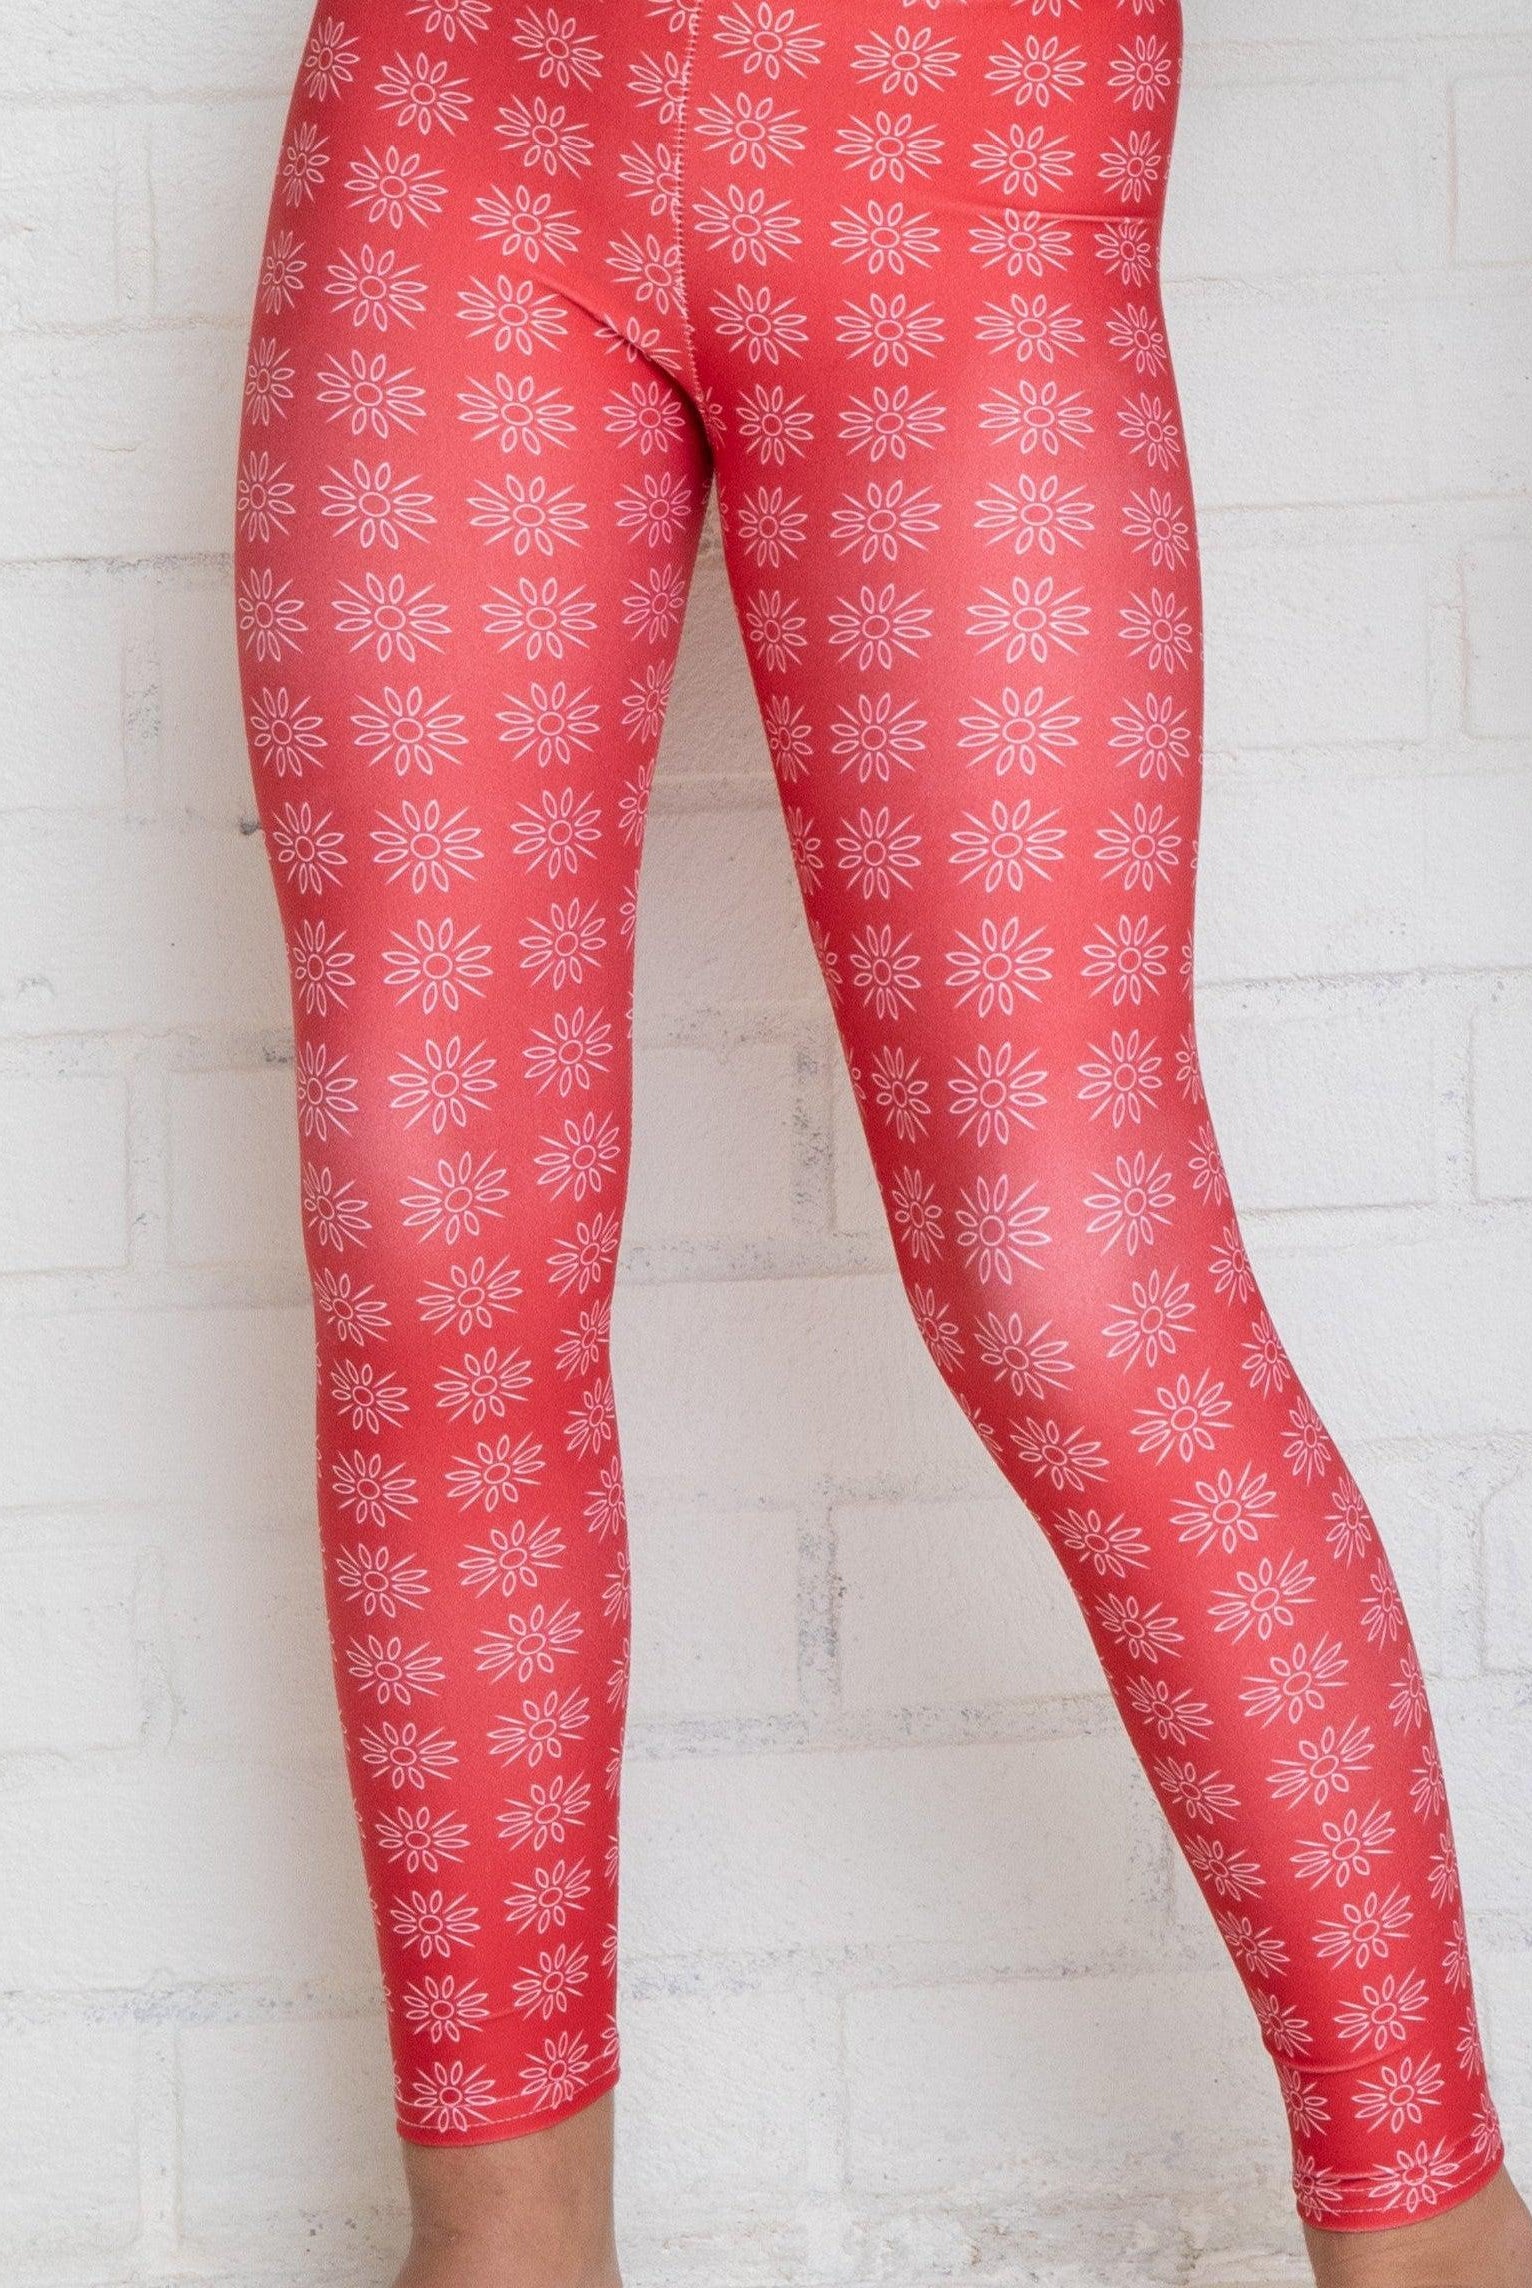 Bellybunny-Youth Leggings-red with sun pattern